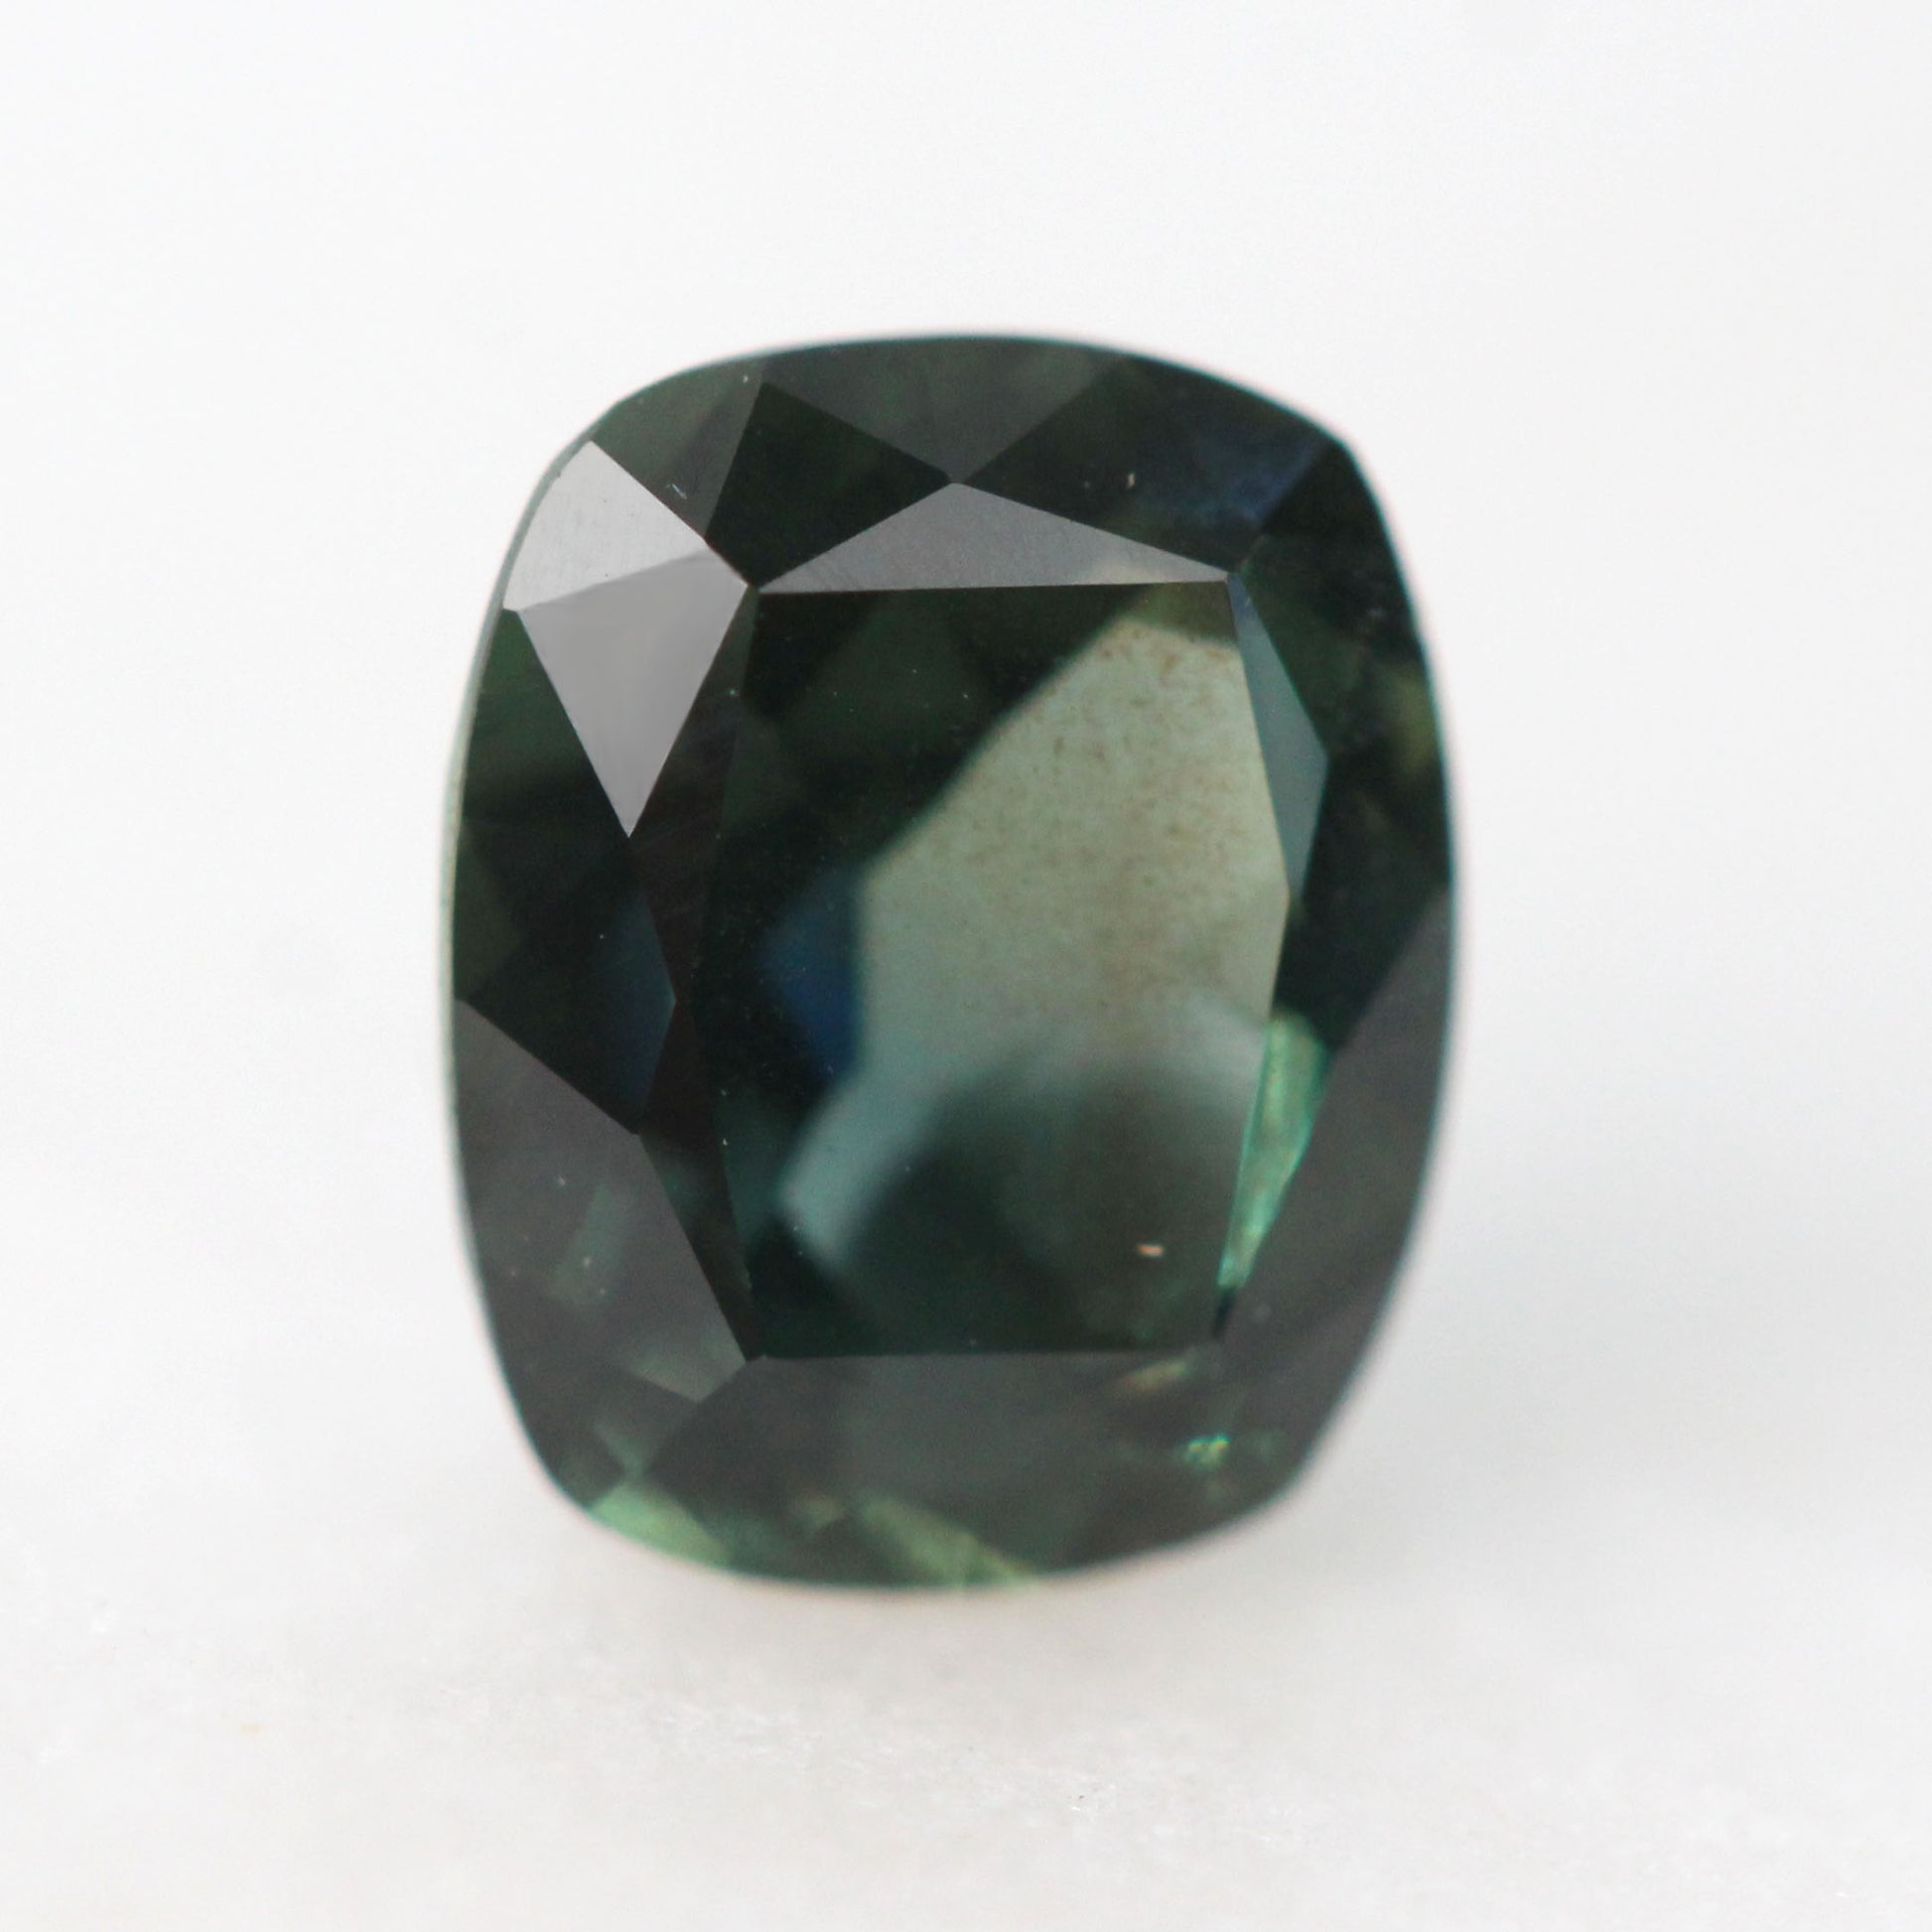 1.12 Carat Teal Green Elongated Cushion Sapphire for Custom Work - Inventory Code TGCS112 - Midwinter Co. Alternative Bridal Rings and Modern Fine Jewelry